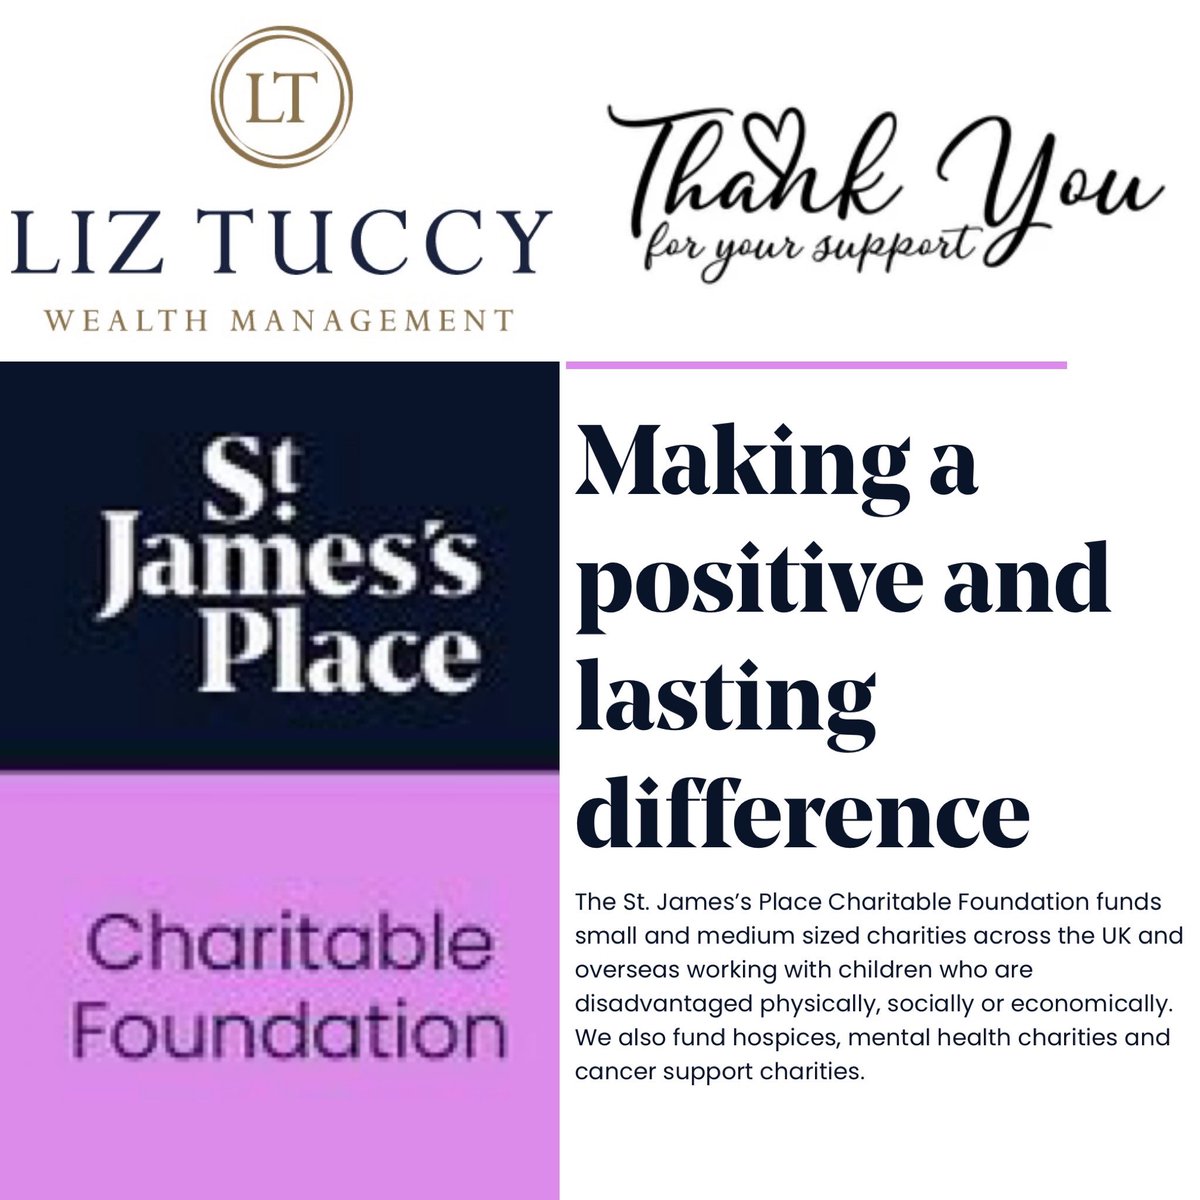 What a way to end the week! We want to say the biggest thank you to St James’s Palace Charitable Foundation @sjpwealth for awarding us a grant of £1,000 towards our mental health services at Sunrise 🙏❤️ Thank you so much to  Liz Tuccy Wealth Management for all your support too